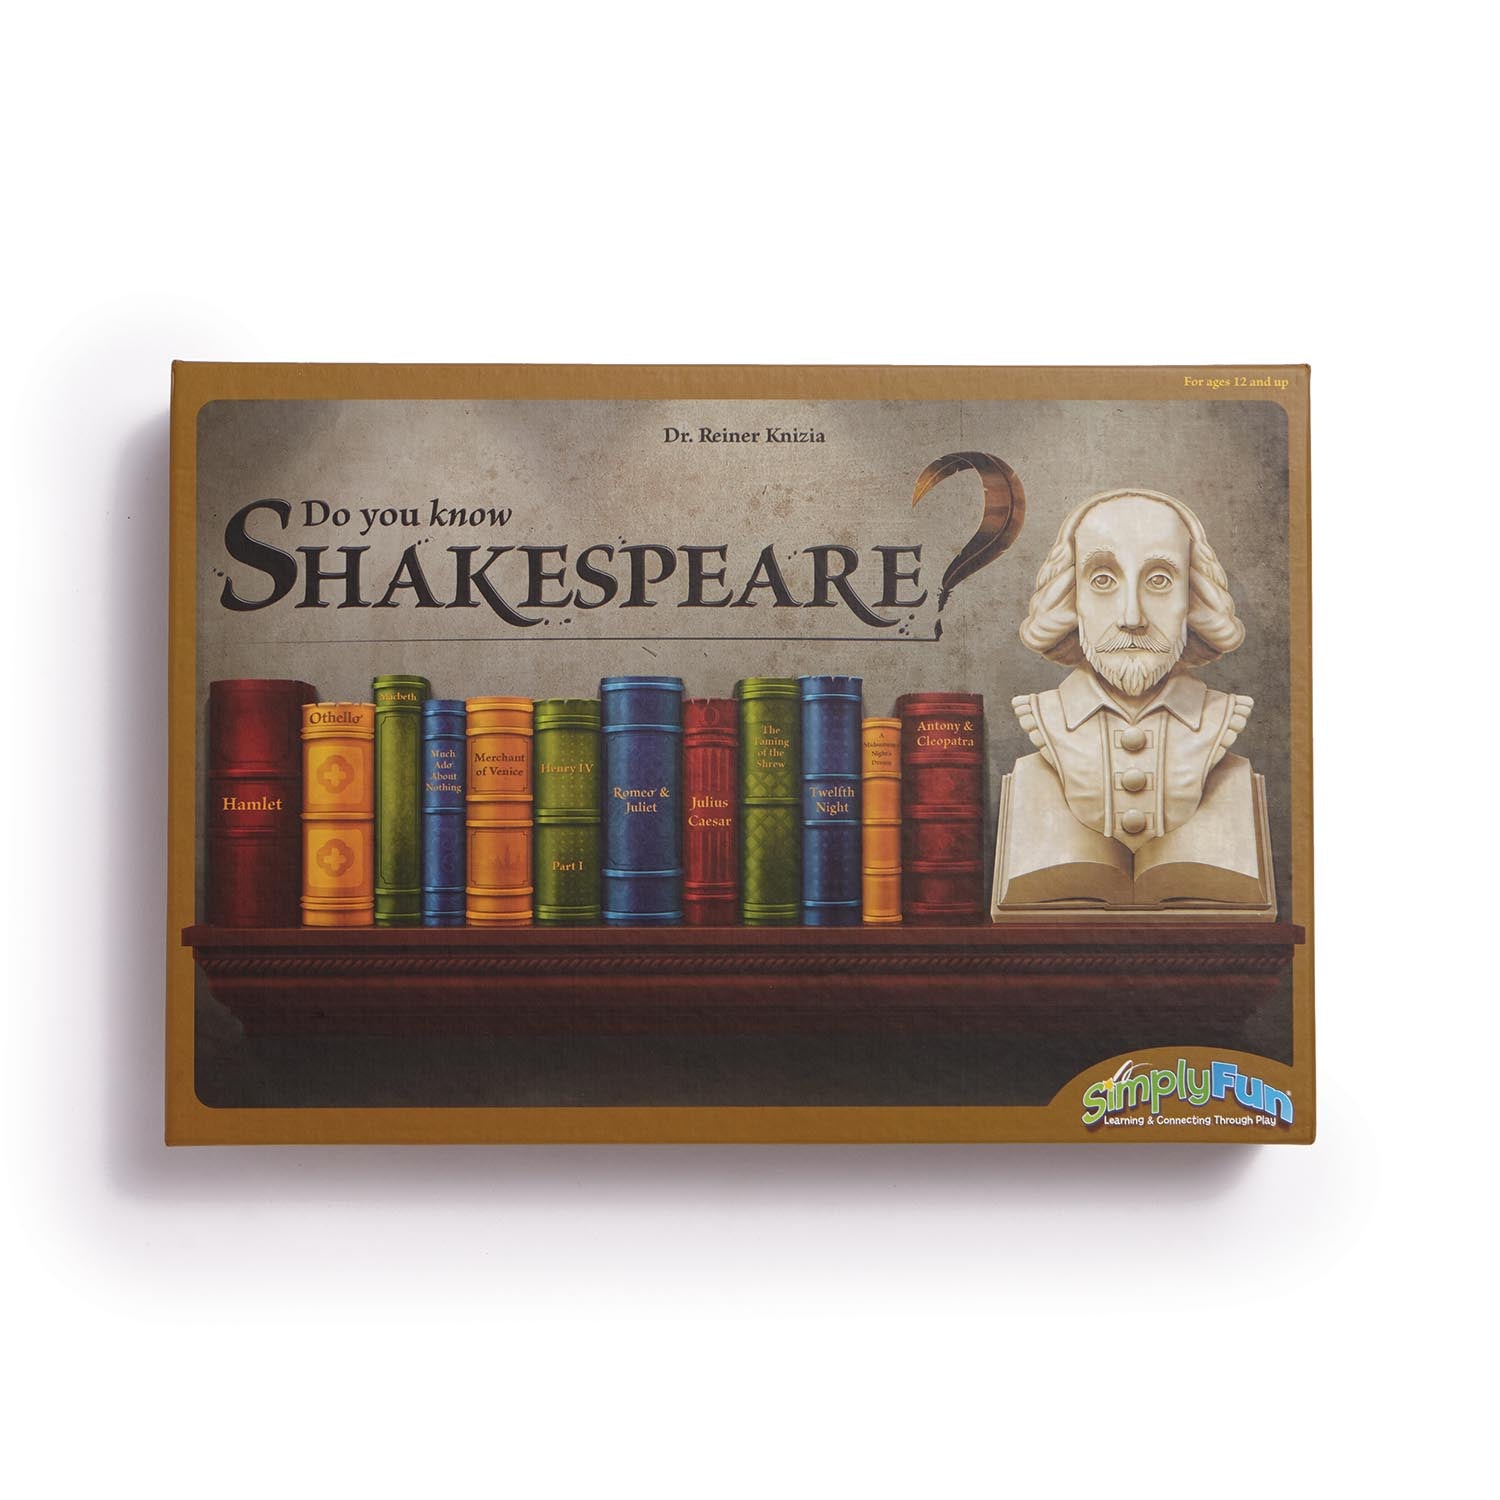 Do You Know Shakespeare by SimplyFun is a shakespeare trivia game for ages 12 and up